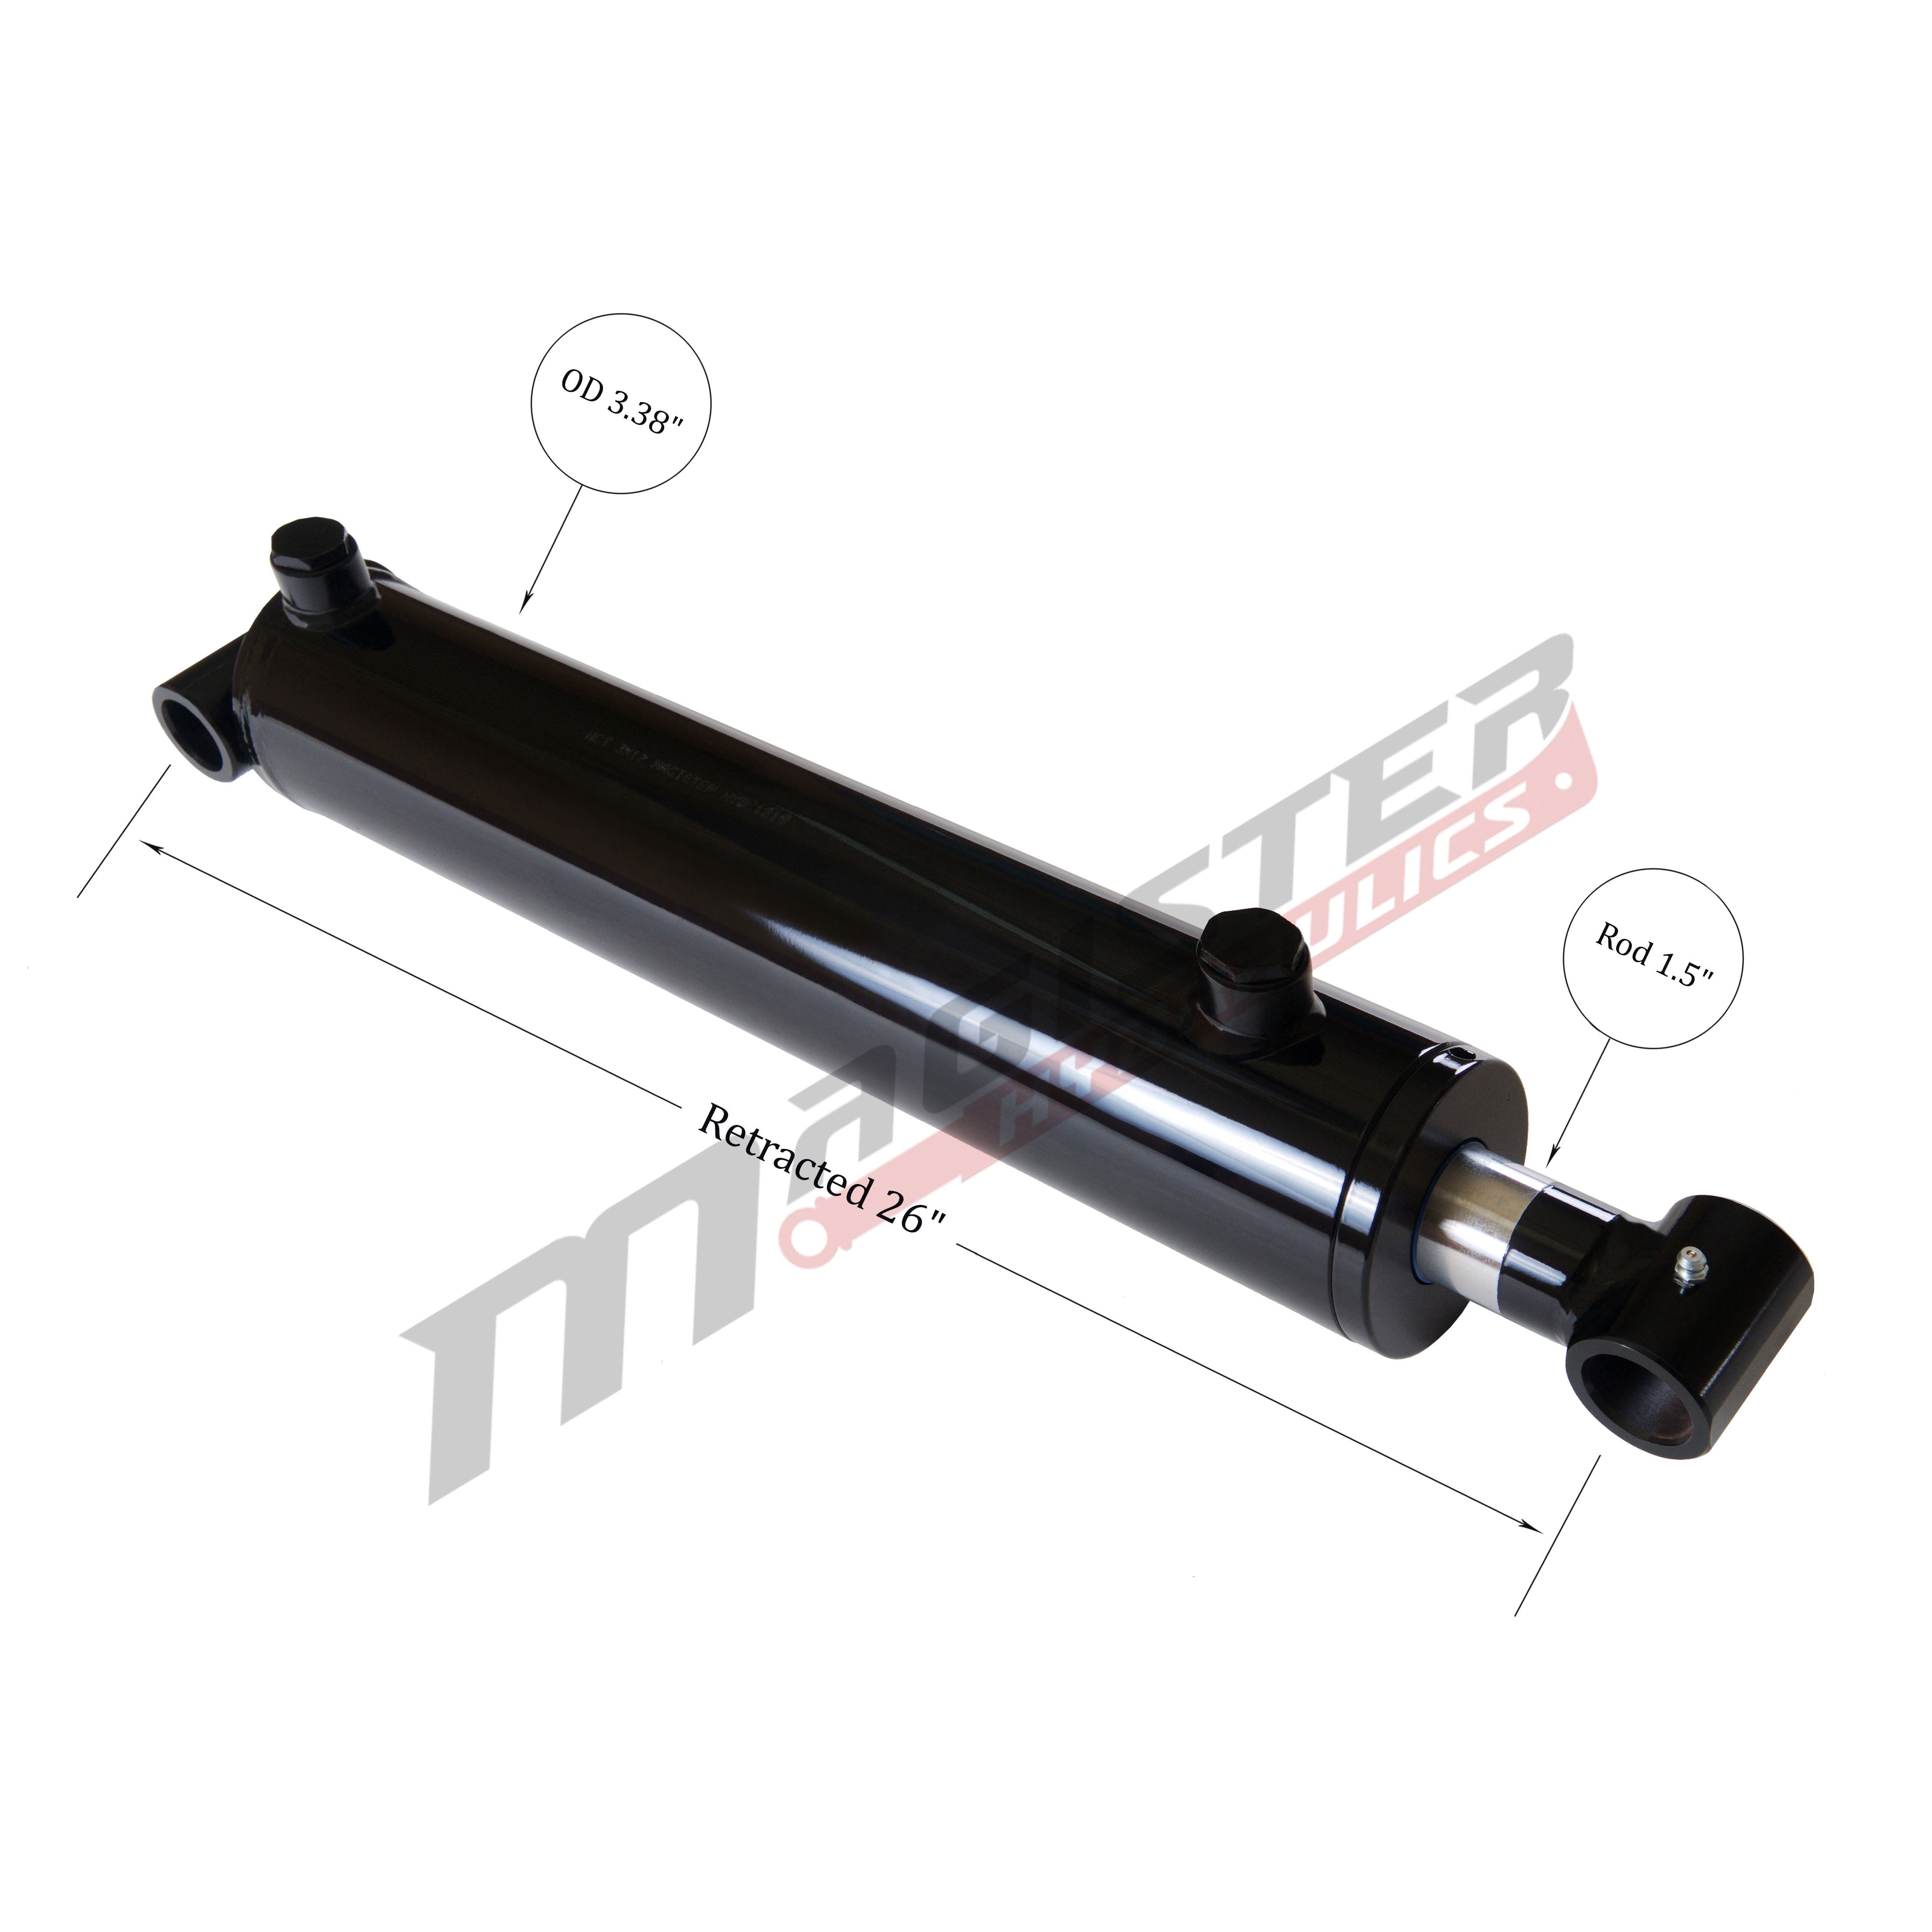 3 bore x 18 stroke hydraulic cylinder, welded cross tube double acting cylinder | Magister Hydraulics